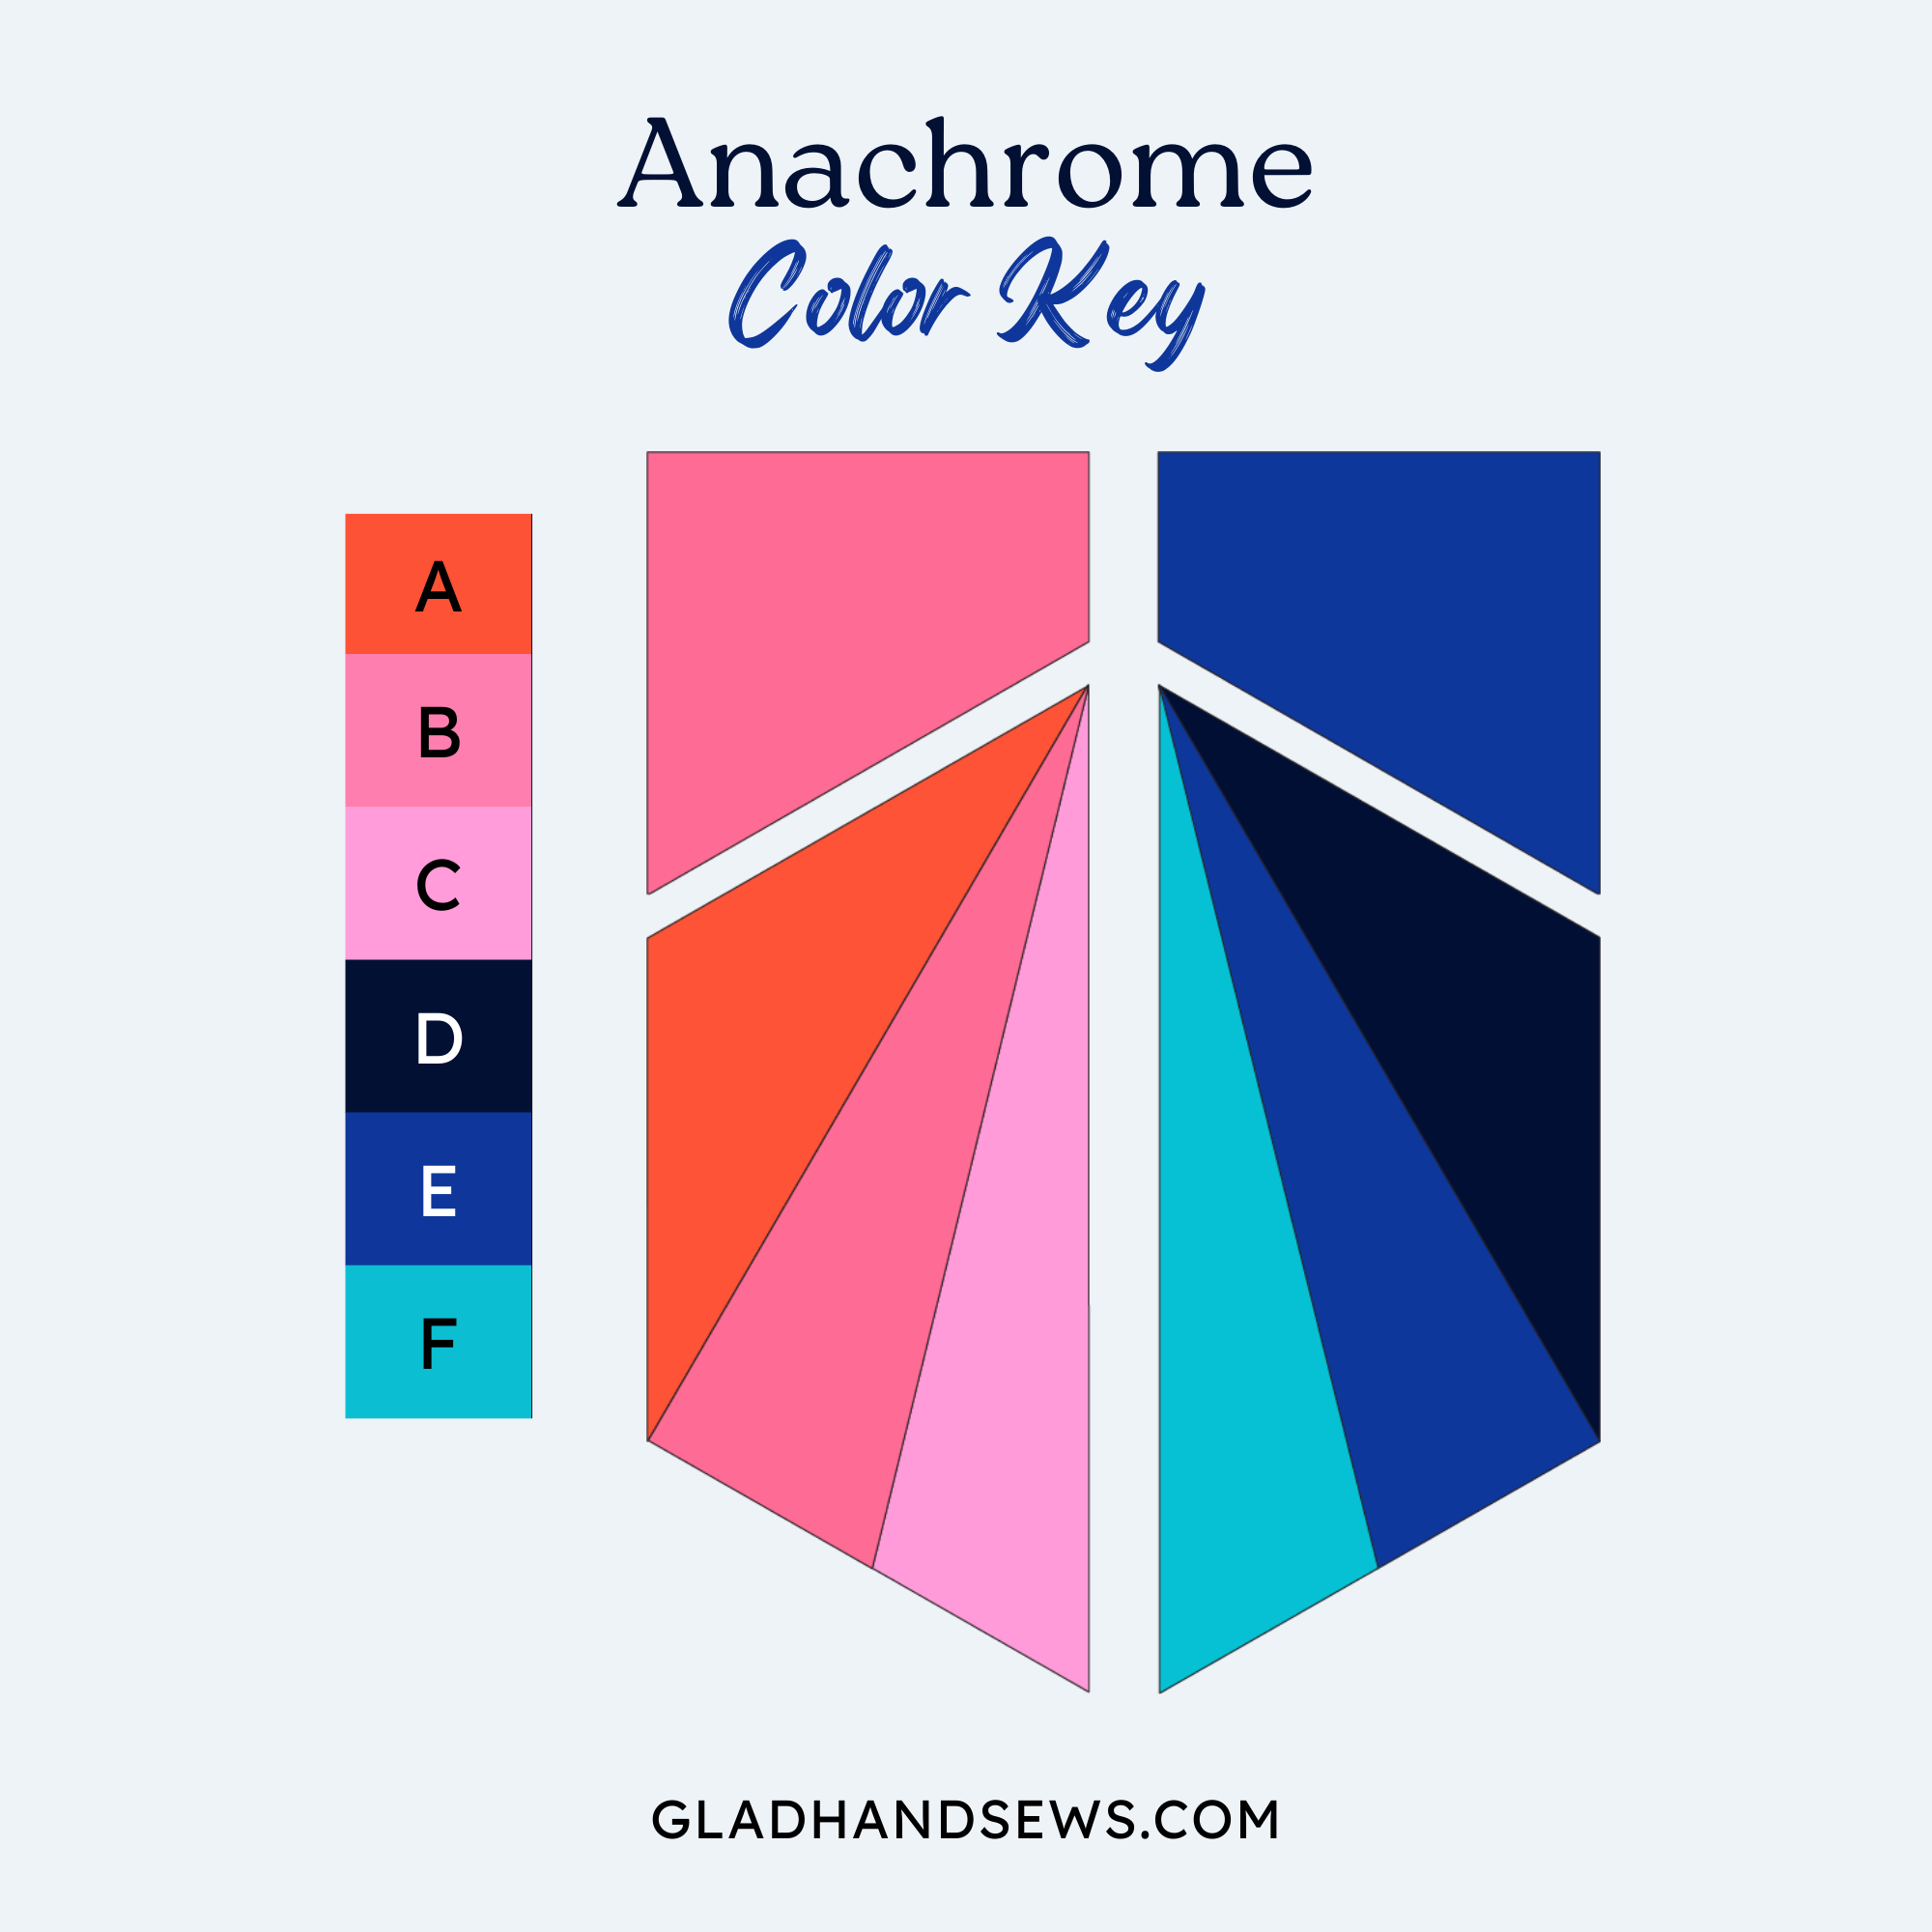 Anachrome_color key.png